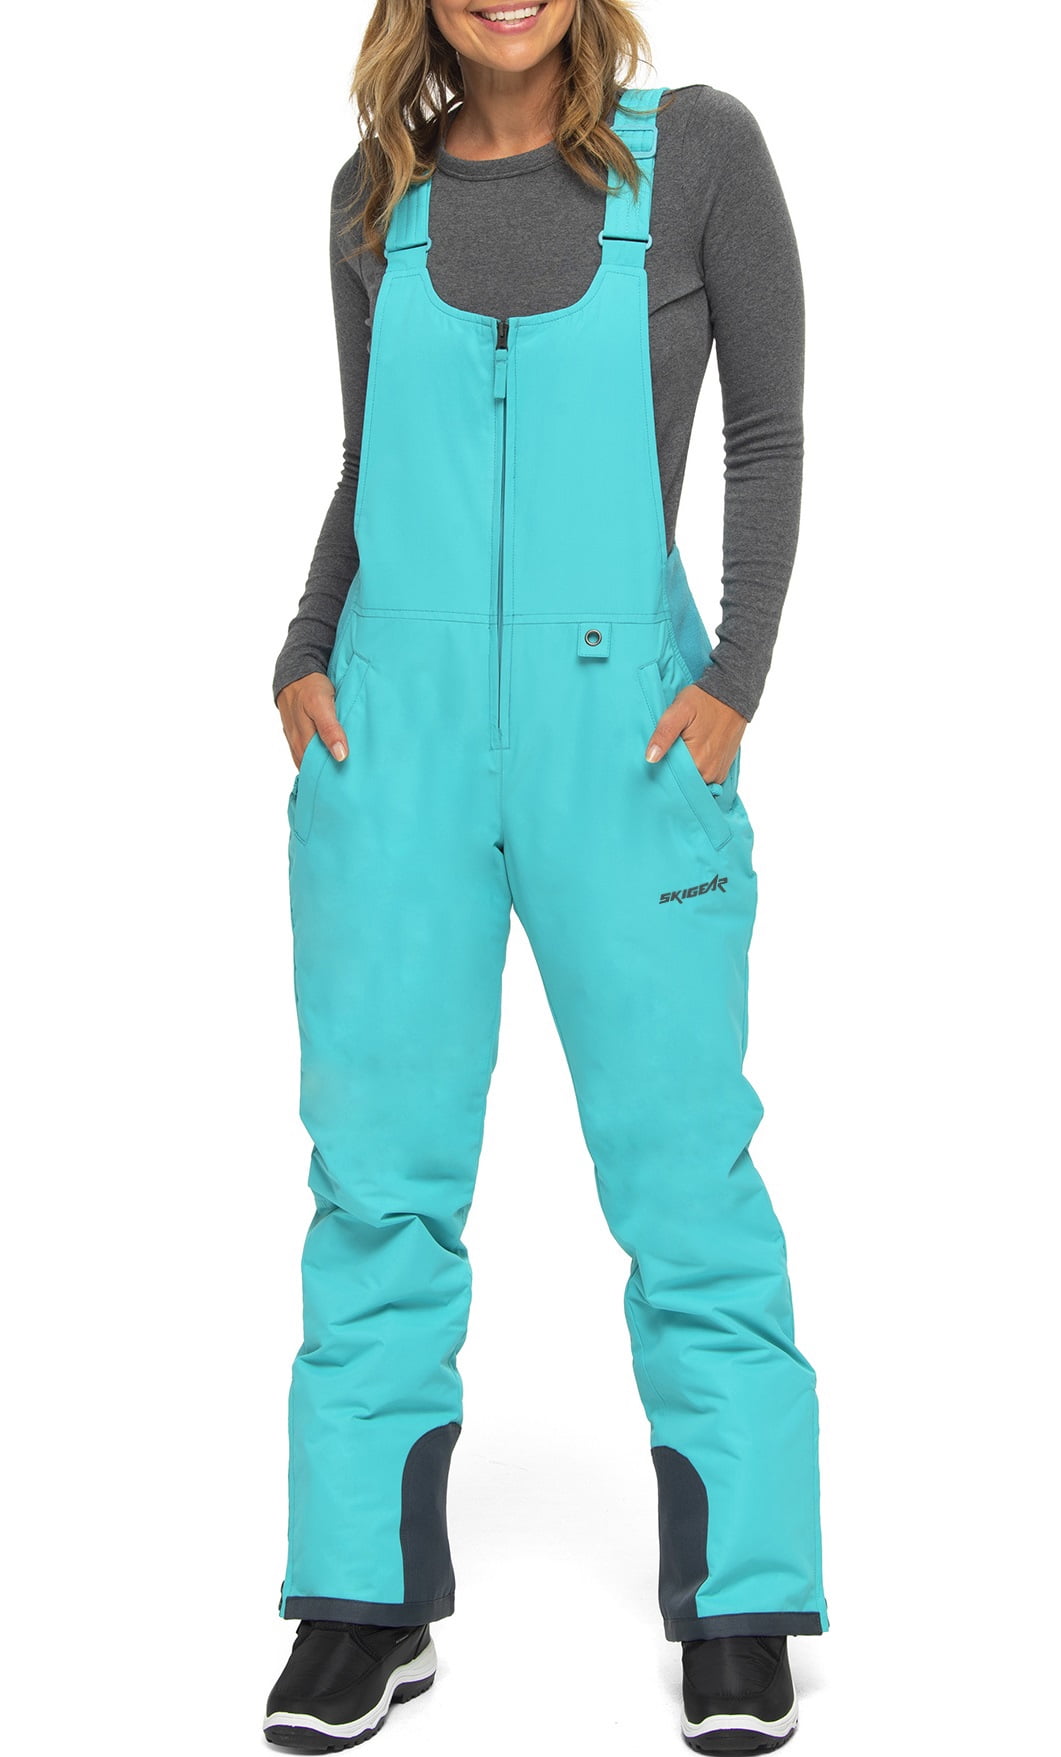 SkiGear by Arctix Women's and Plus Size Winter Snow Bib Overall